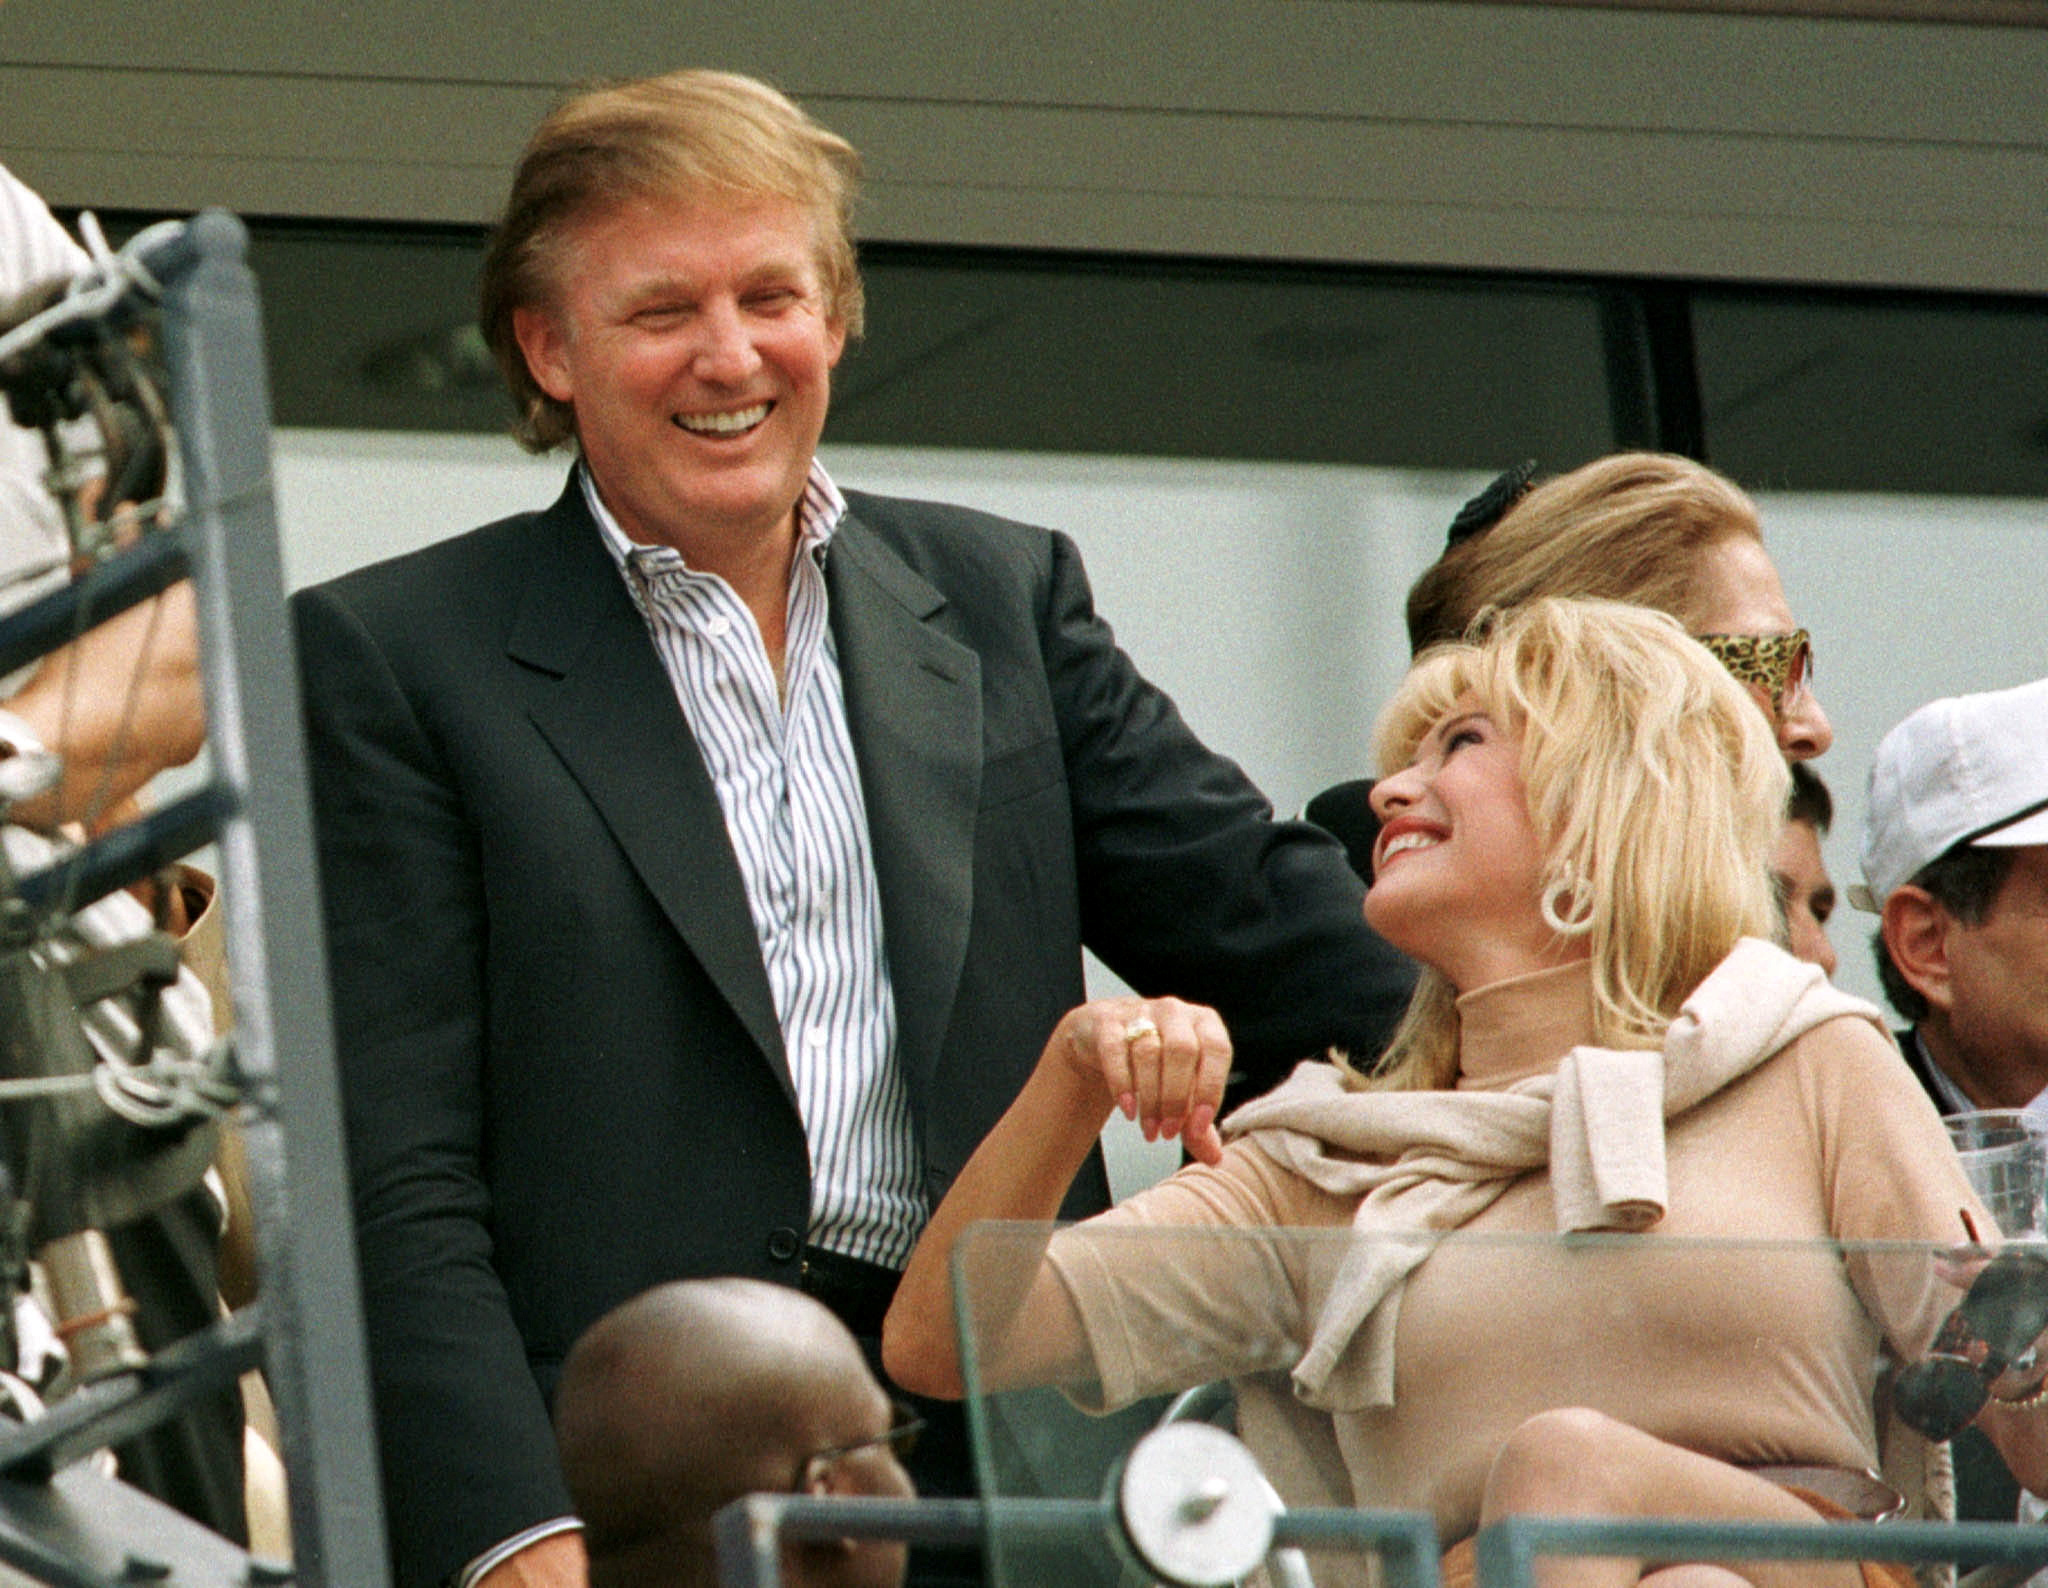 FILE PHOTO: Donald Trump with Ivana Trump in 1997 (REUTERS/Mike Blake)